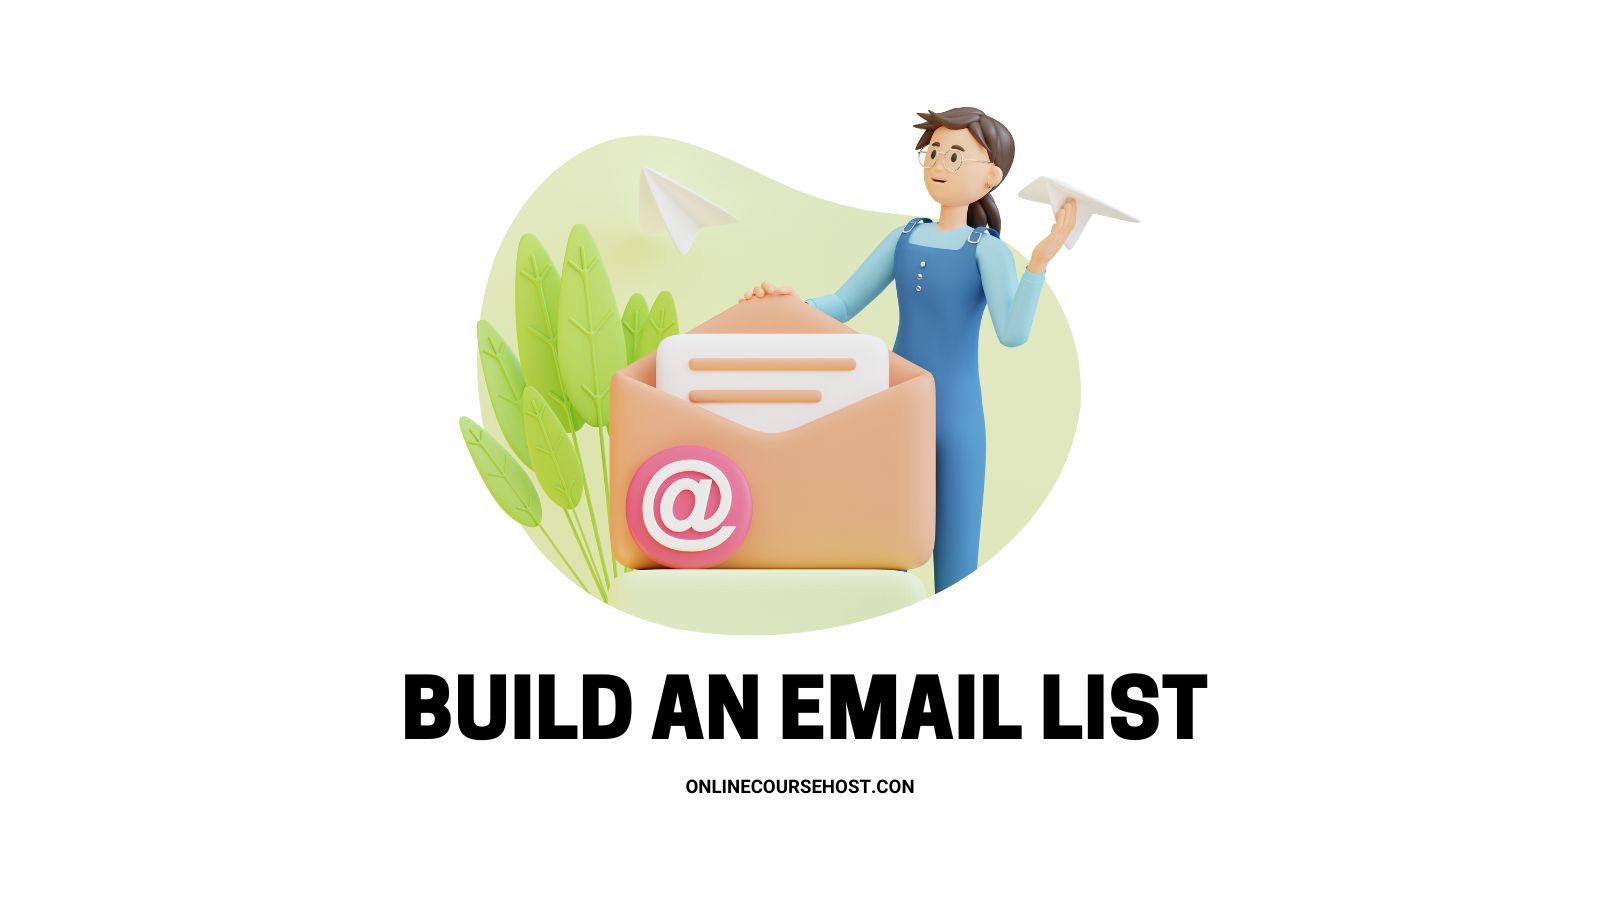 build an email list to add subscribers